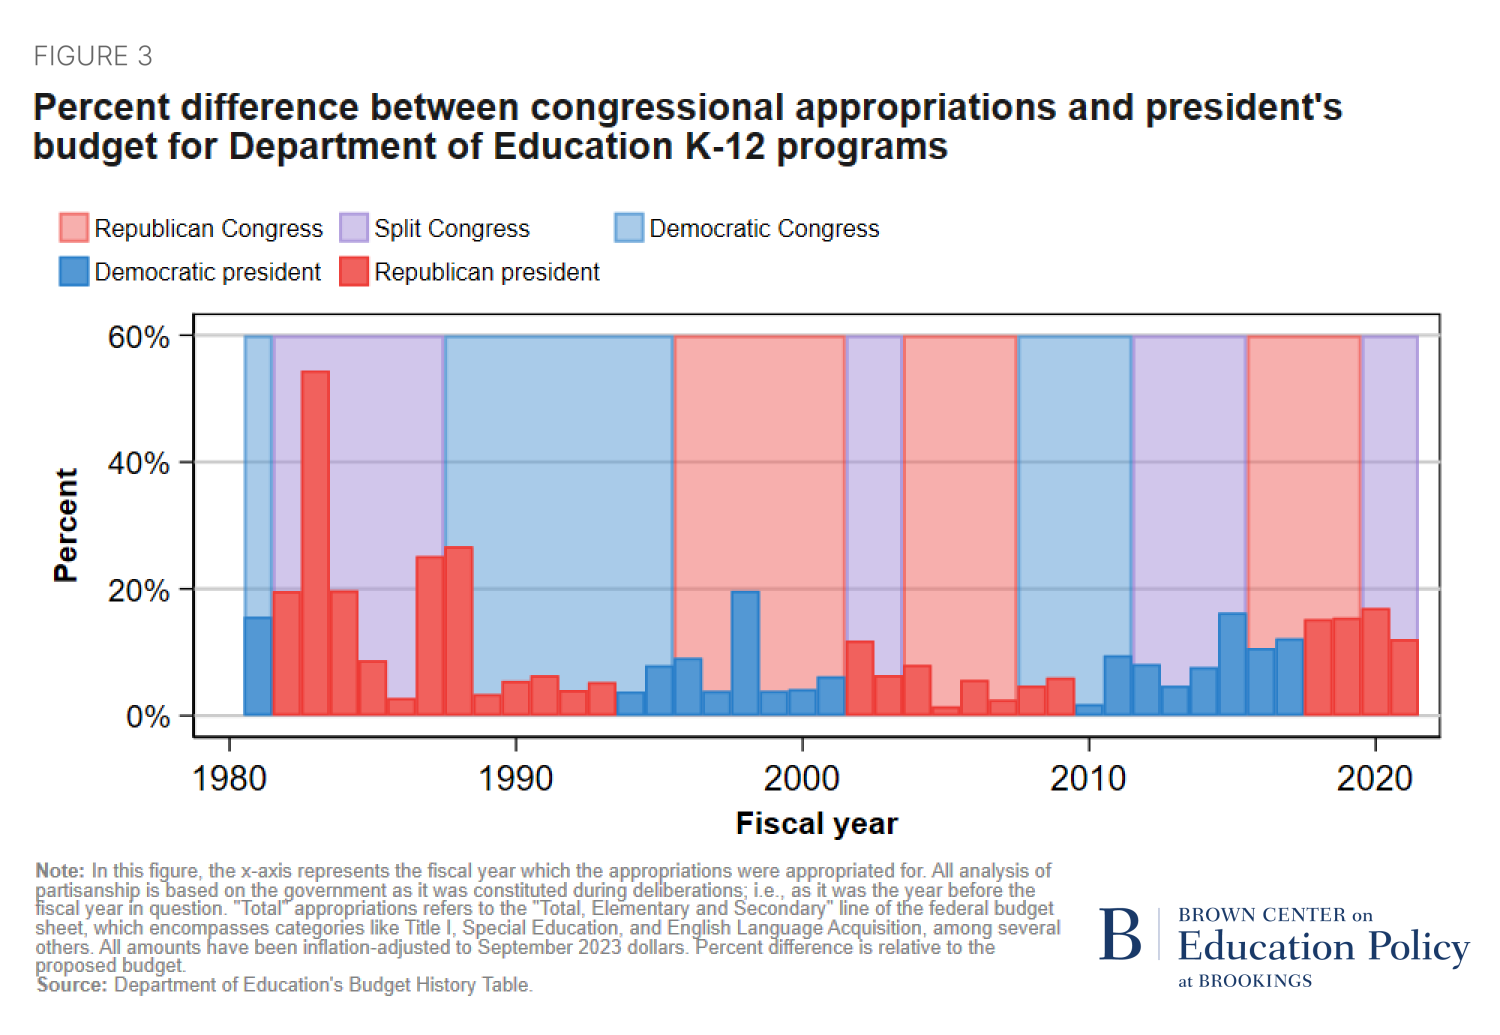 Percent difference between congressional appropriations and president's budget for Department of Education K-12 programs